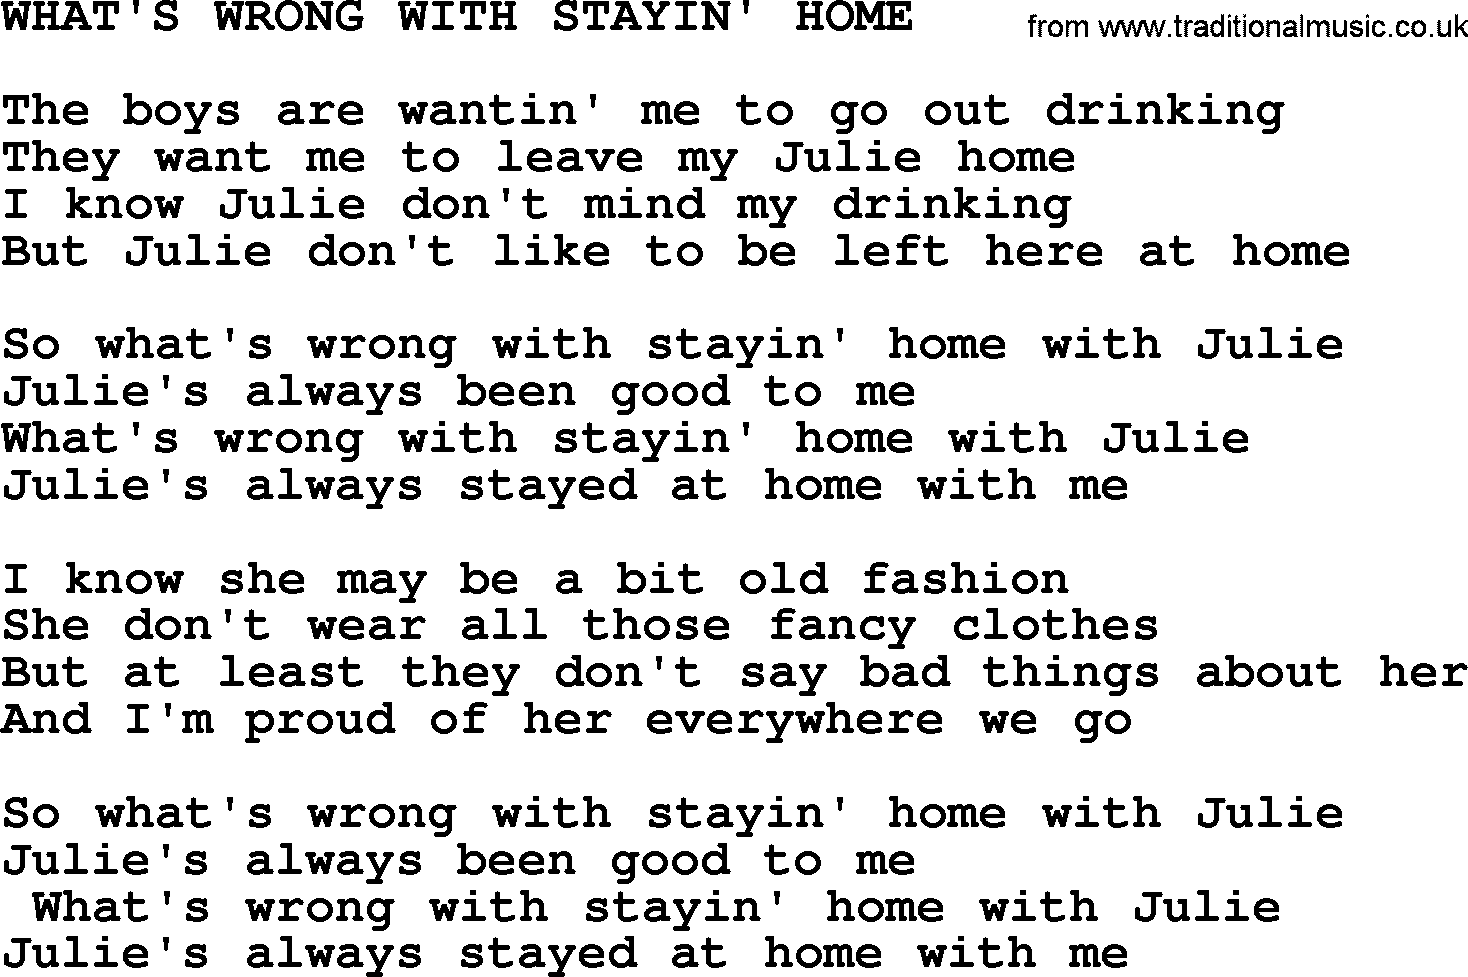 Merle Haggard song: What's Wrong With Stayin' Home, lyrics.